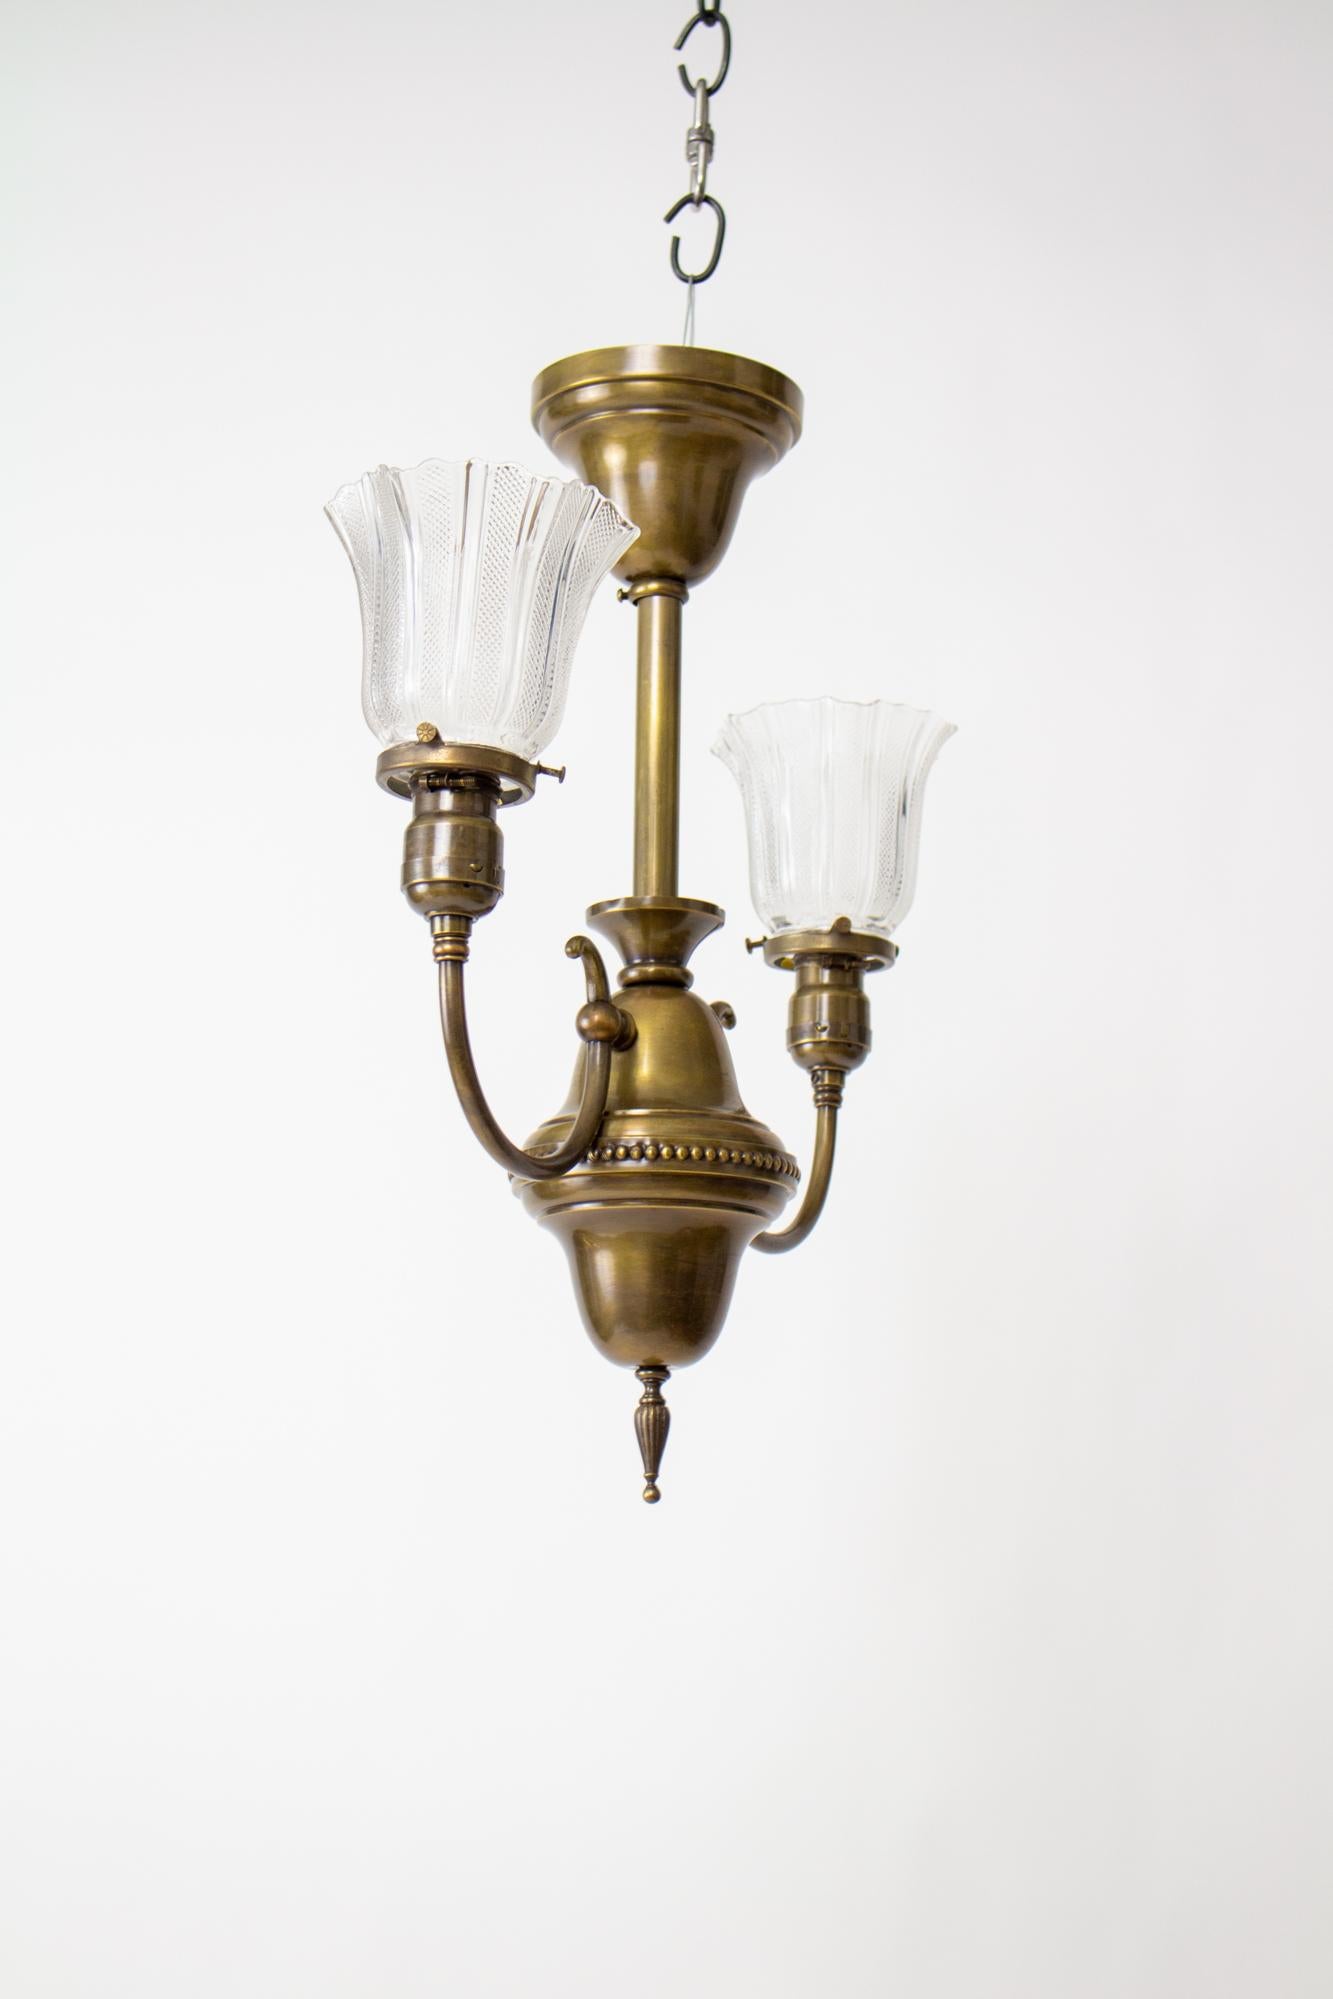 Brass Early Electric Fixture with Prismatic Glass For Sale 2